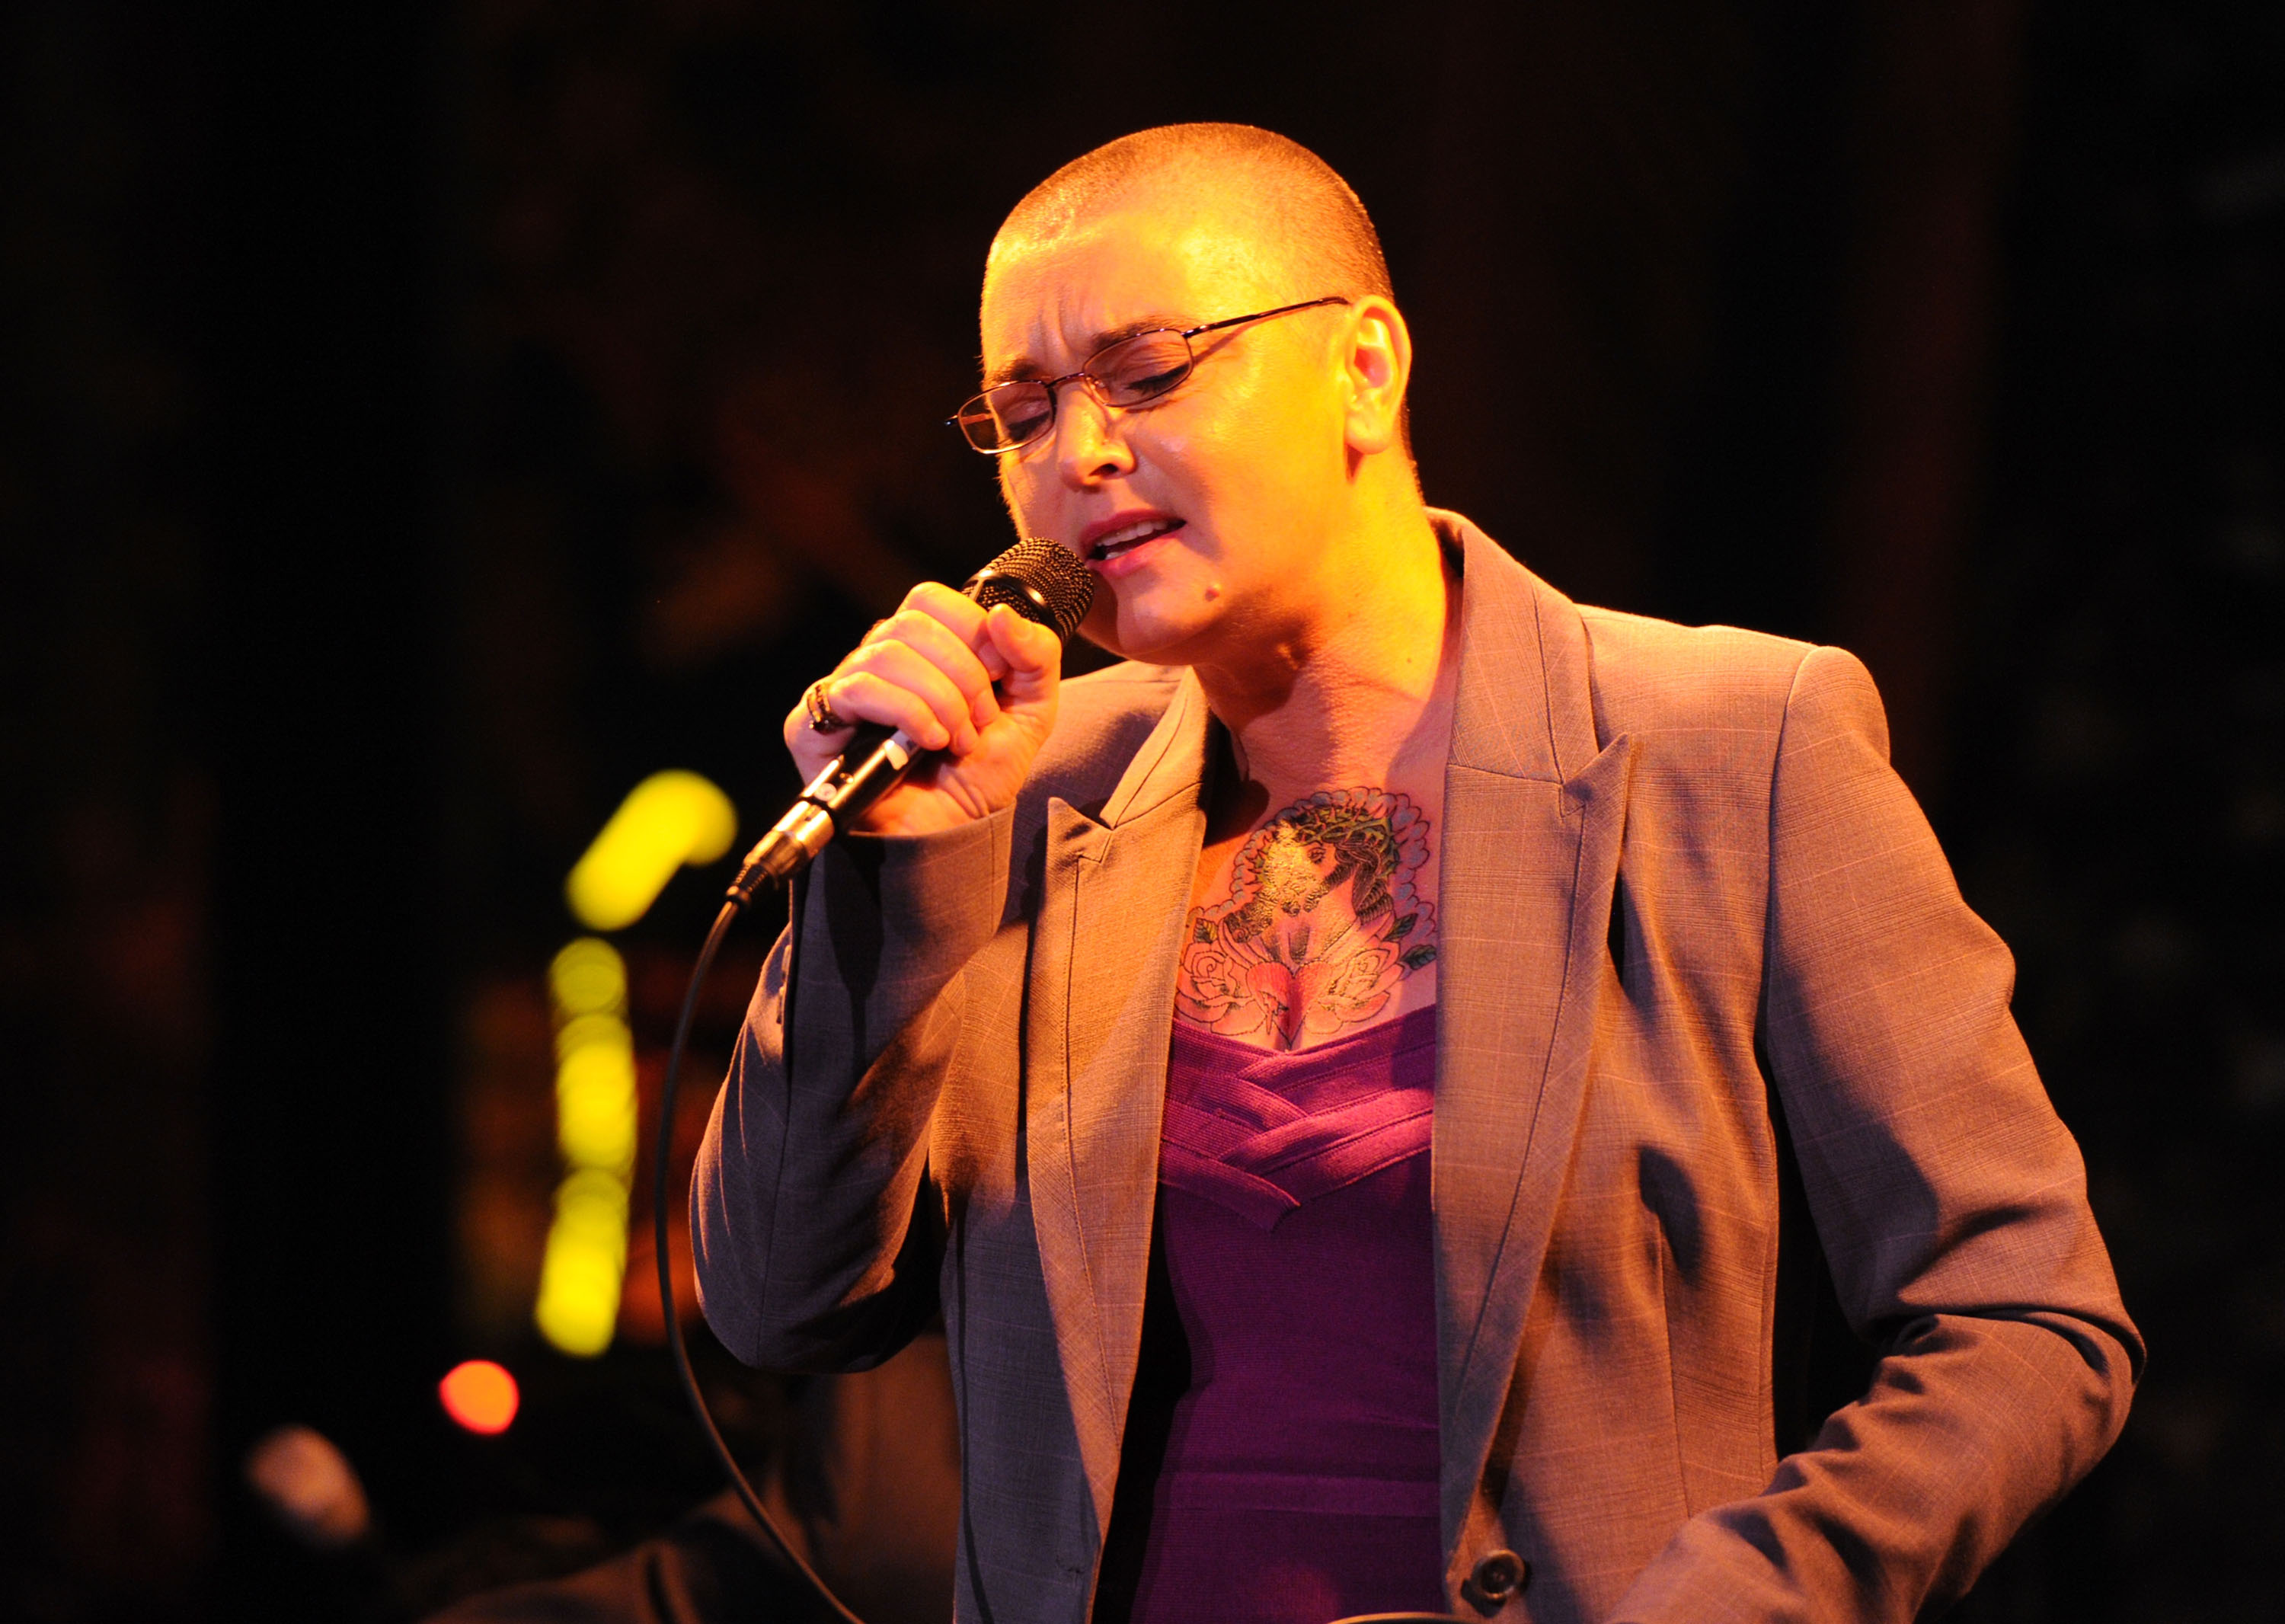 LOS ANGELES, CA - OCTOBER 27: Singer Sinead O'Connor performs at The 2011 amfAR Inspiration Gala Los Angeles held at the Chateau Marmont on October 27, 2011 in Los Angeles, California. (Photo by Alberto E. Rodriguez/Getty Images for amfAR)